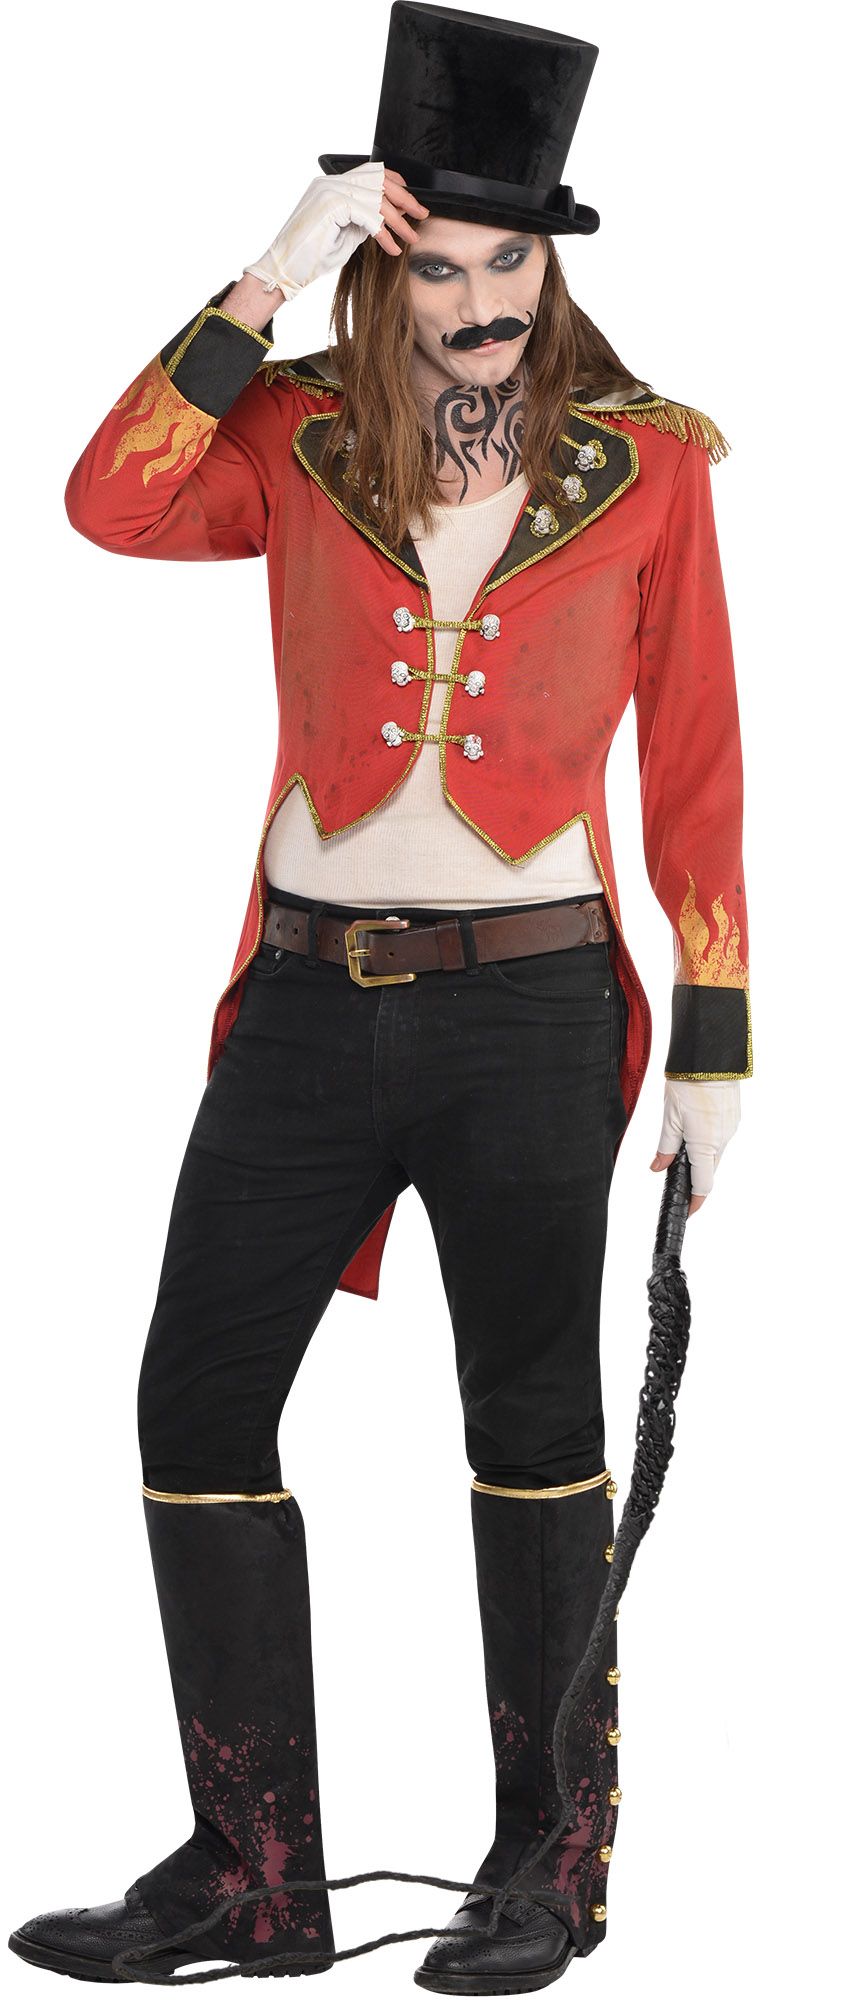 Create Your Own Men's Ringmaster Costume Accessories - Party City